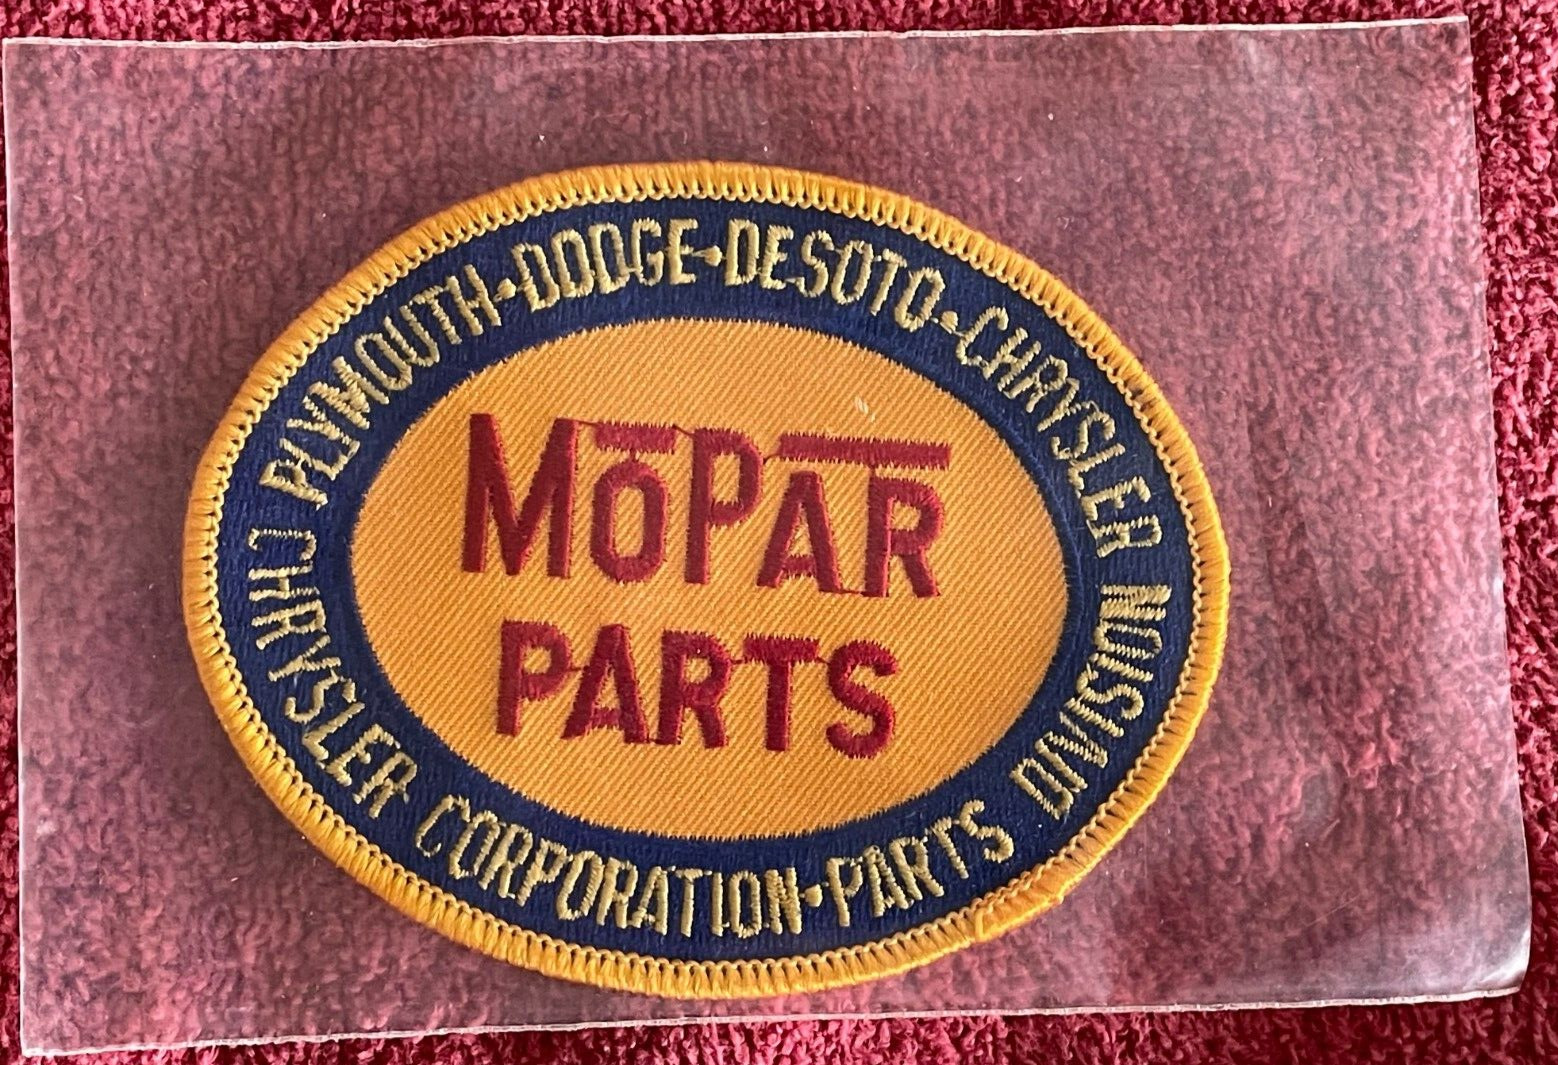 MOPAR PARTS Embroidered Patch PLYMOUTH DODGE DeSOTO CHRYSLER, RARE NEVER USED